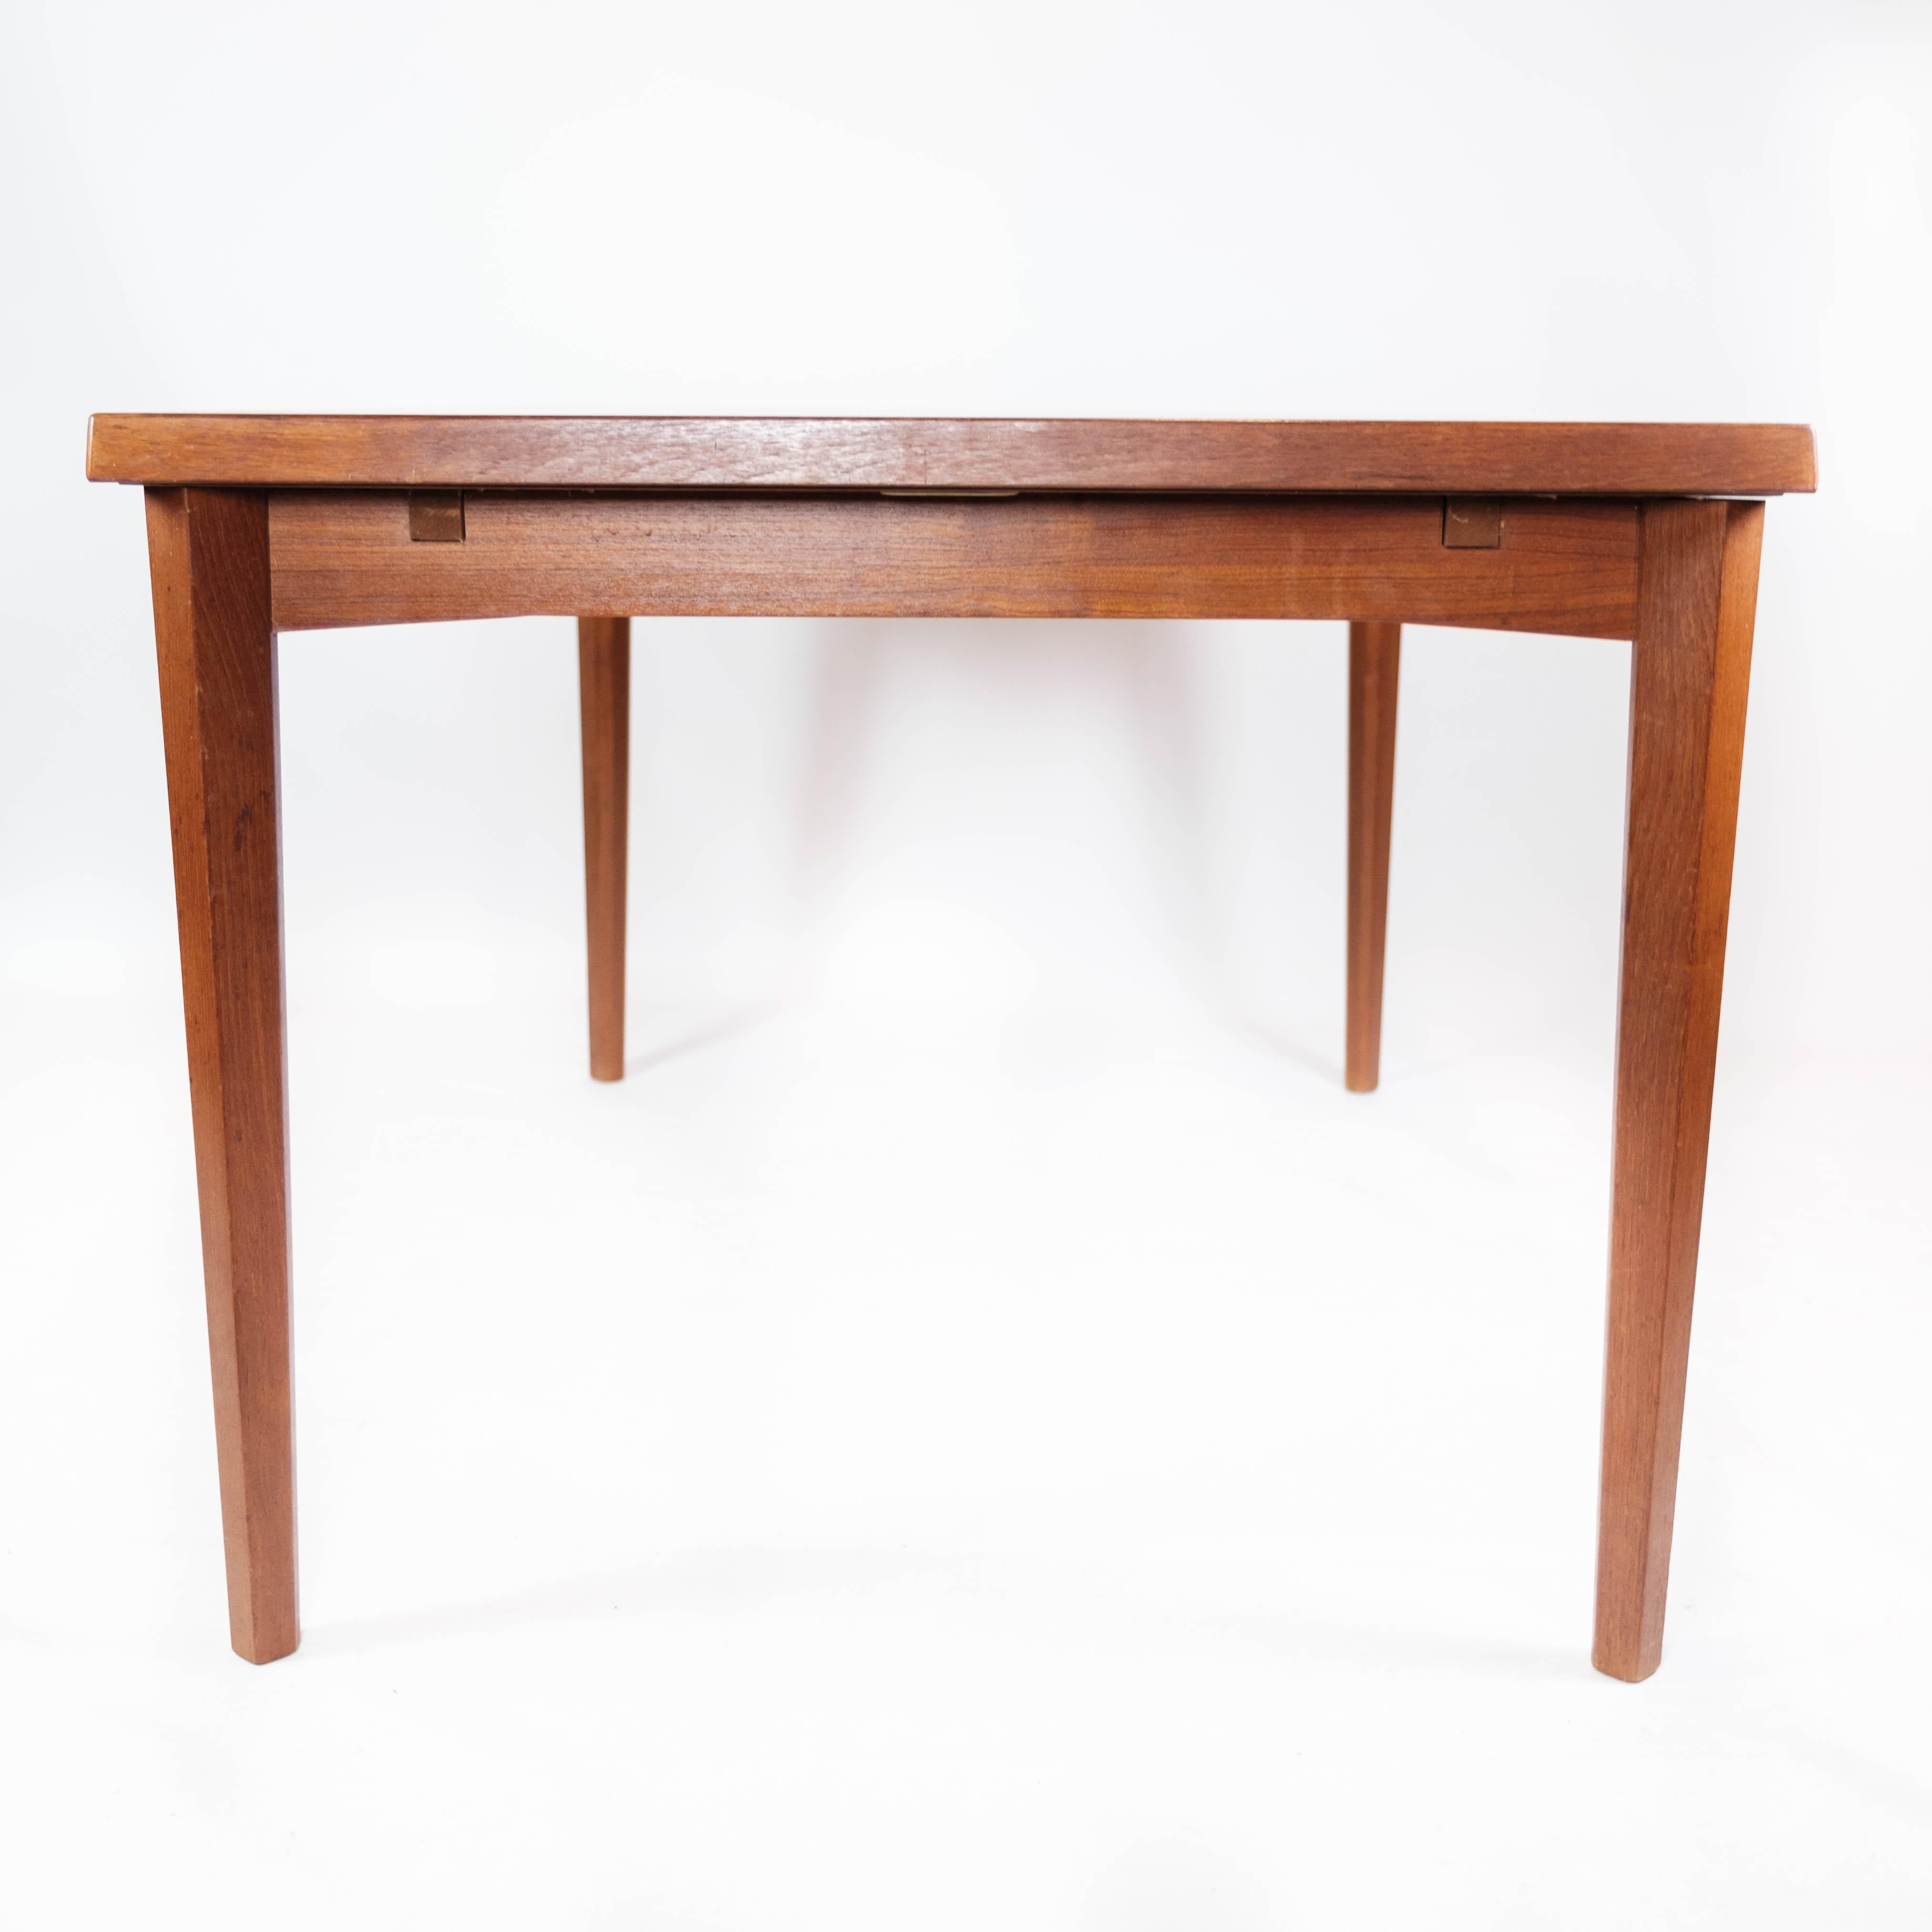 Dining Table in Teak with Extension Plates, of Danish Design from the 1960s For Sale 3